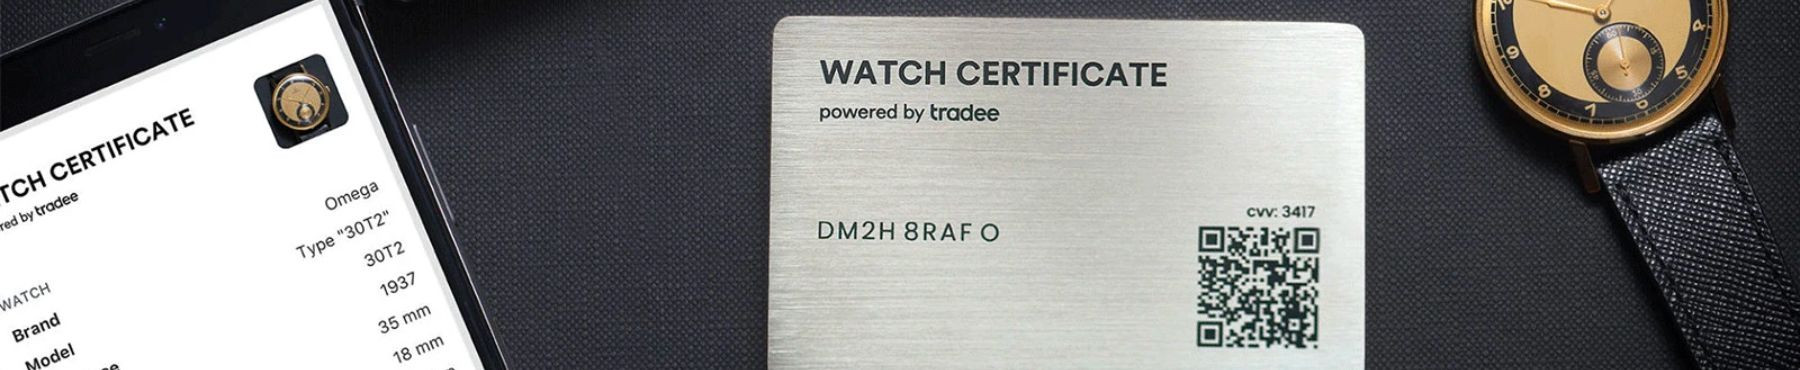 Watches delivered with a Watch Certificate